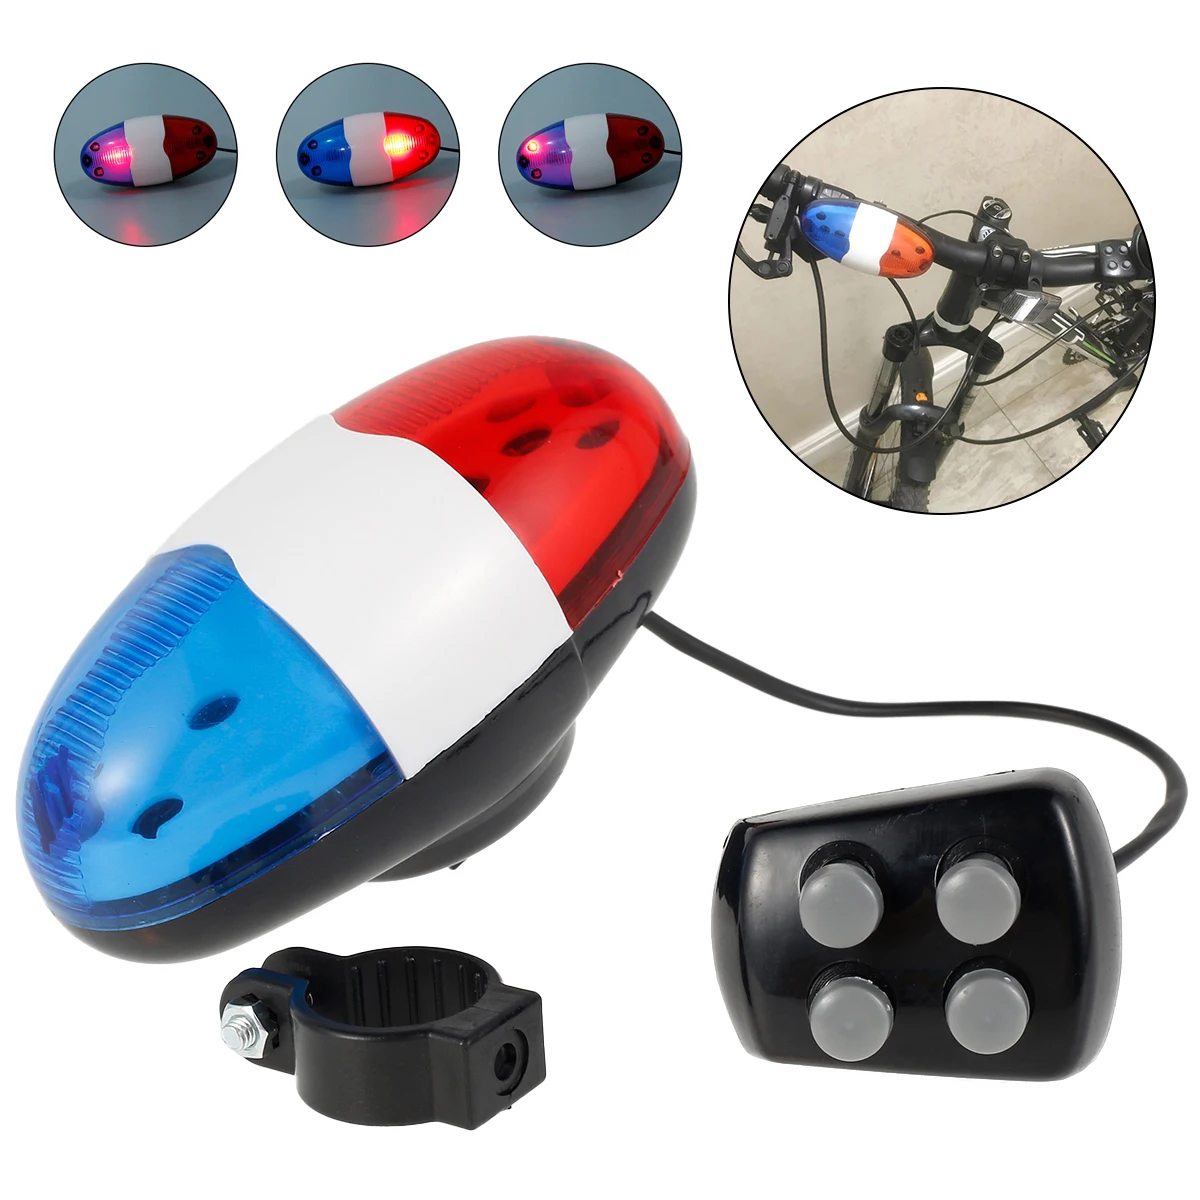 

6 LED 4 Tone Sounds Bicycles Bell Police Car Light Electronic Horn Siren Bike Rear Taillight Bike Lamp Bell Cycling Accessories